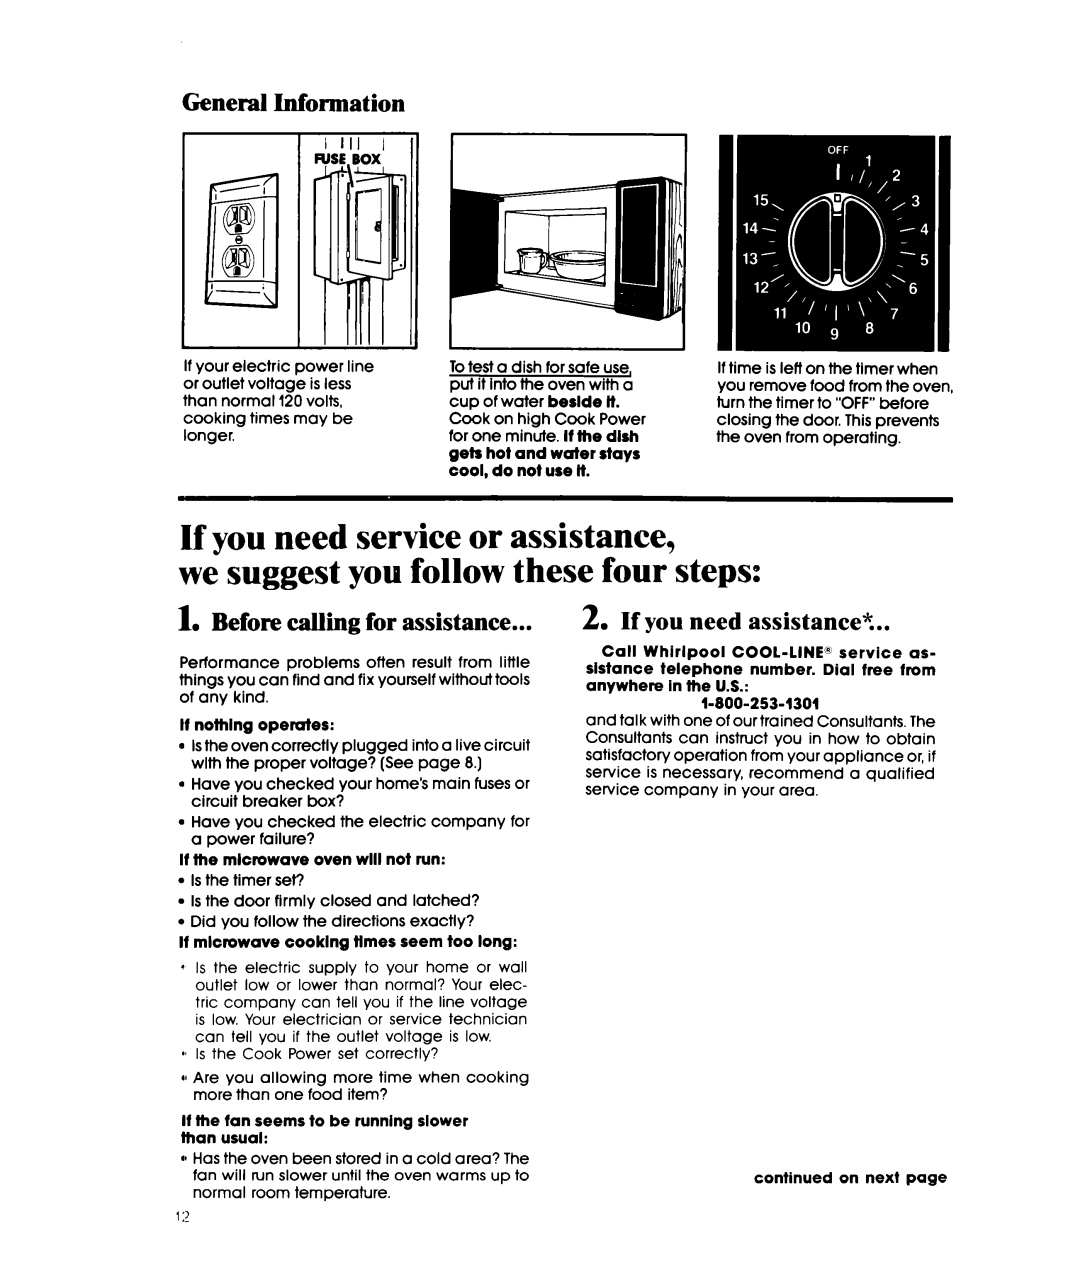 Whirlpool MWIOOOXW manual If you need service or assistance, we suggest you follow these four steps, General Information 